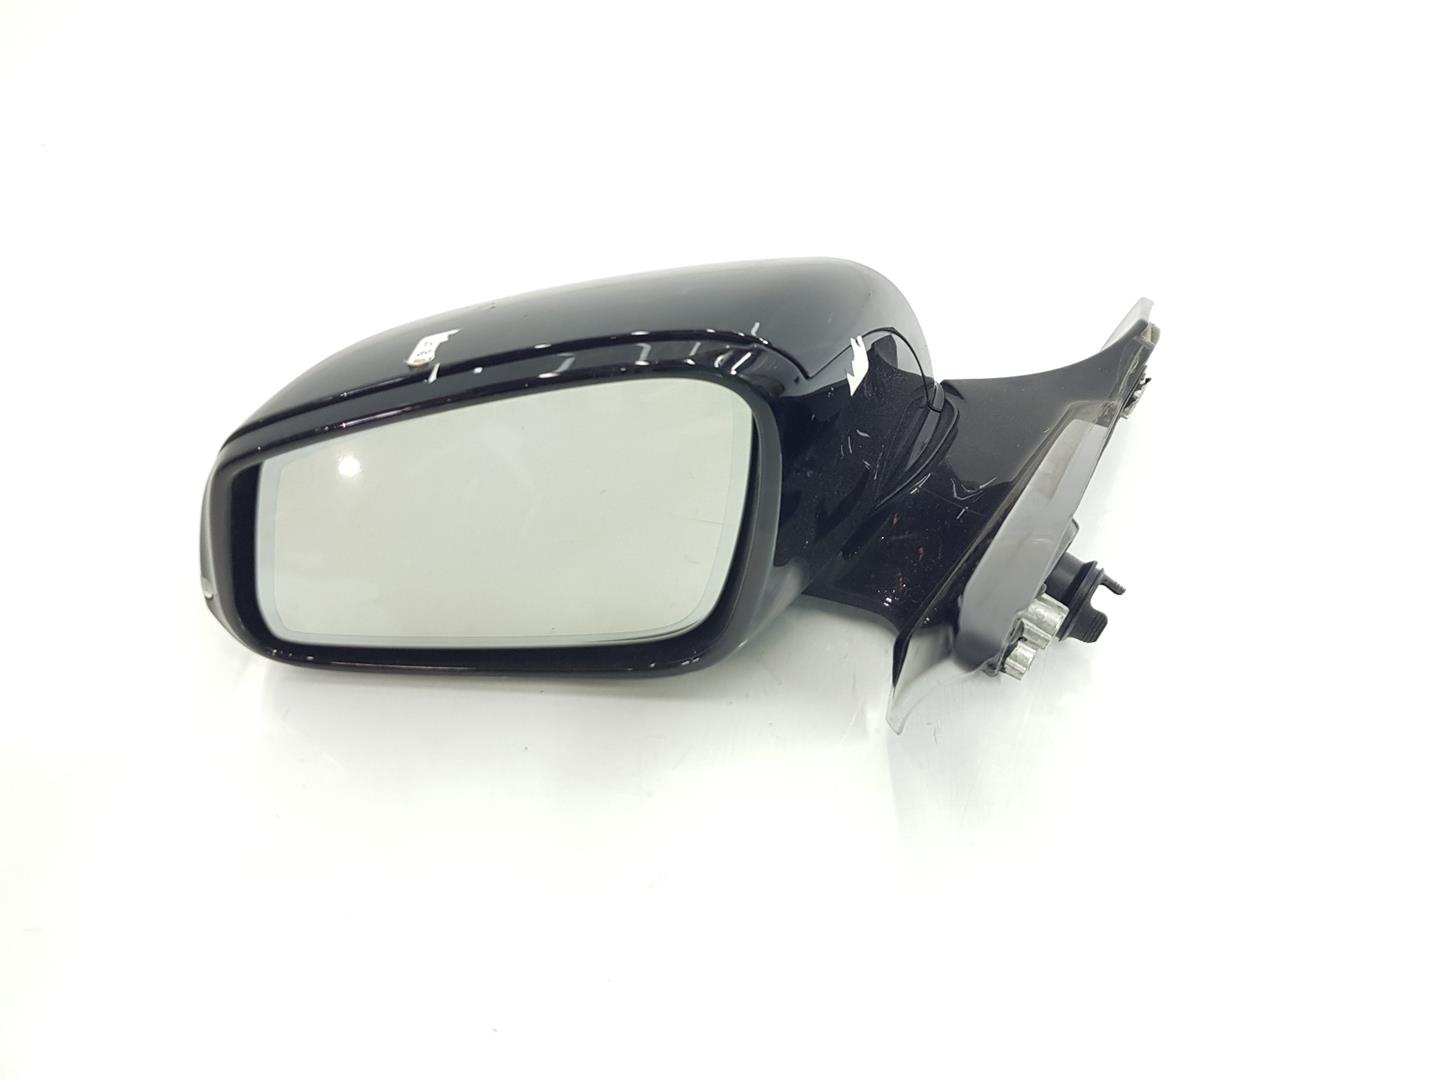 BMW 2 Series F22/F23 (2013-2020) Left Side Wing Mirror 51167268633, 51167268633, COLORNEGRO475 24136562